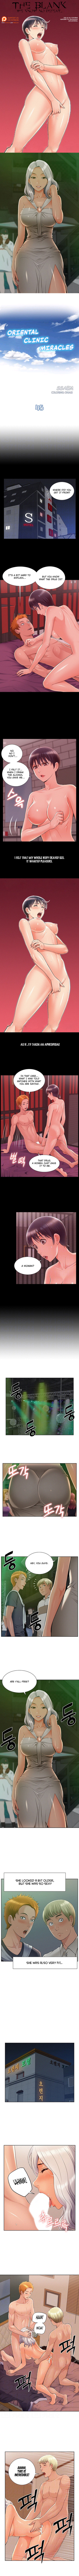 Panel Image 1 for chapter 45 of manhwa Oriental Clinic Miracles on read.oppai.stream